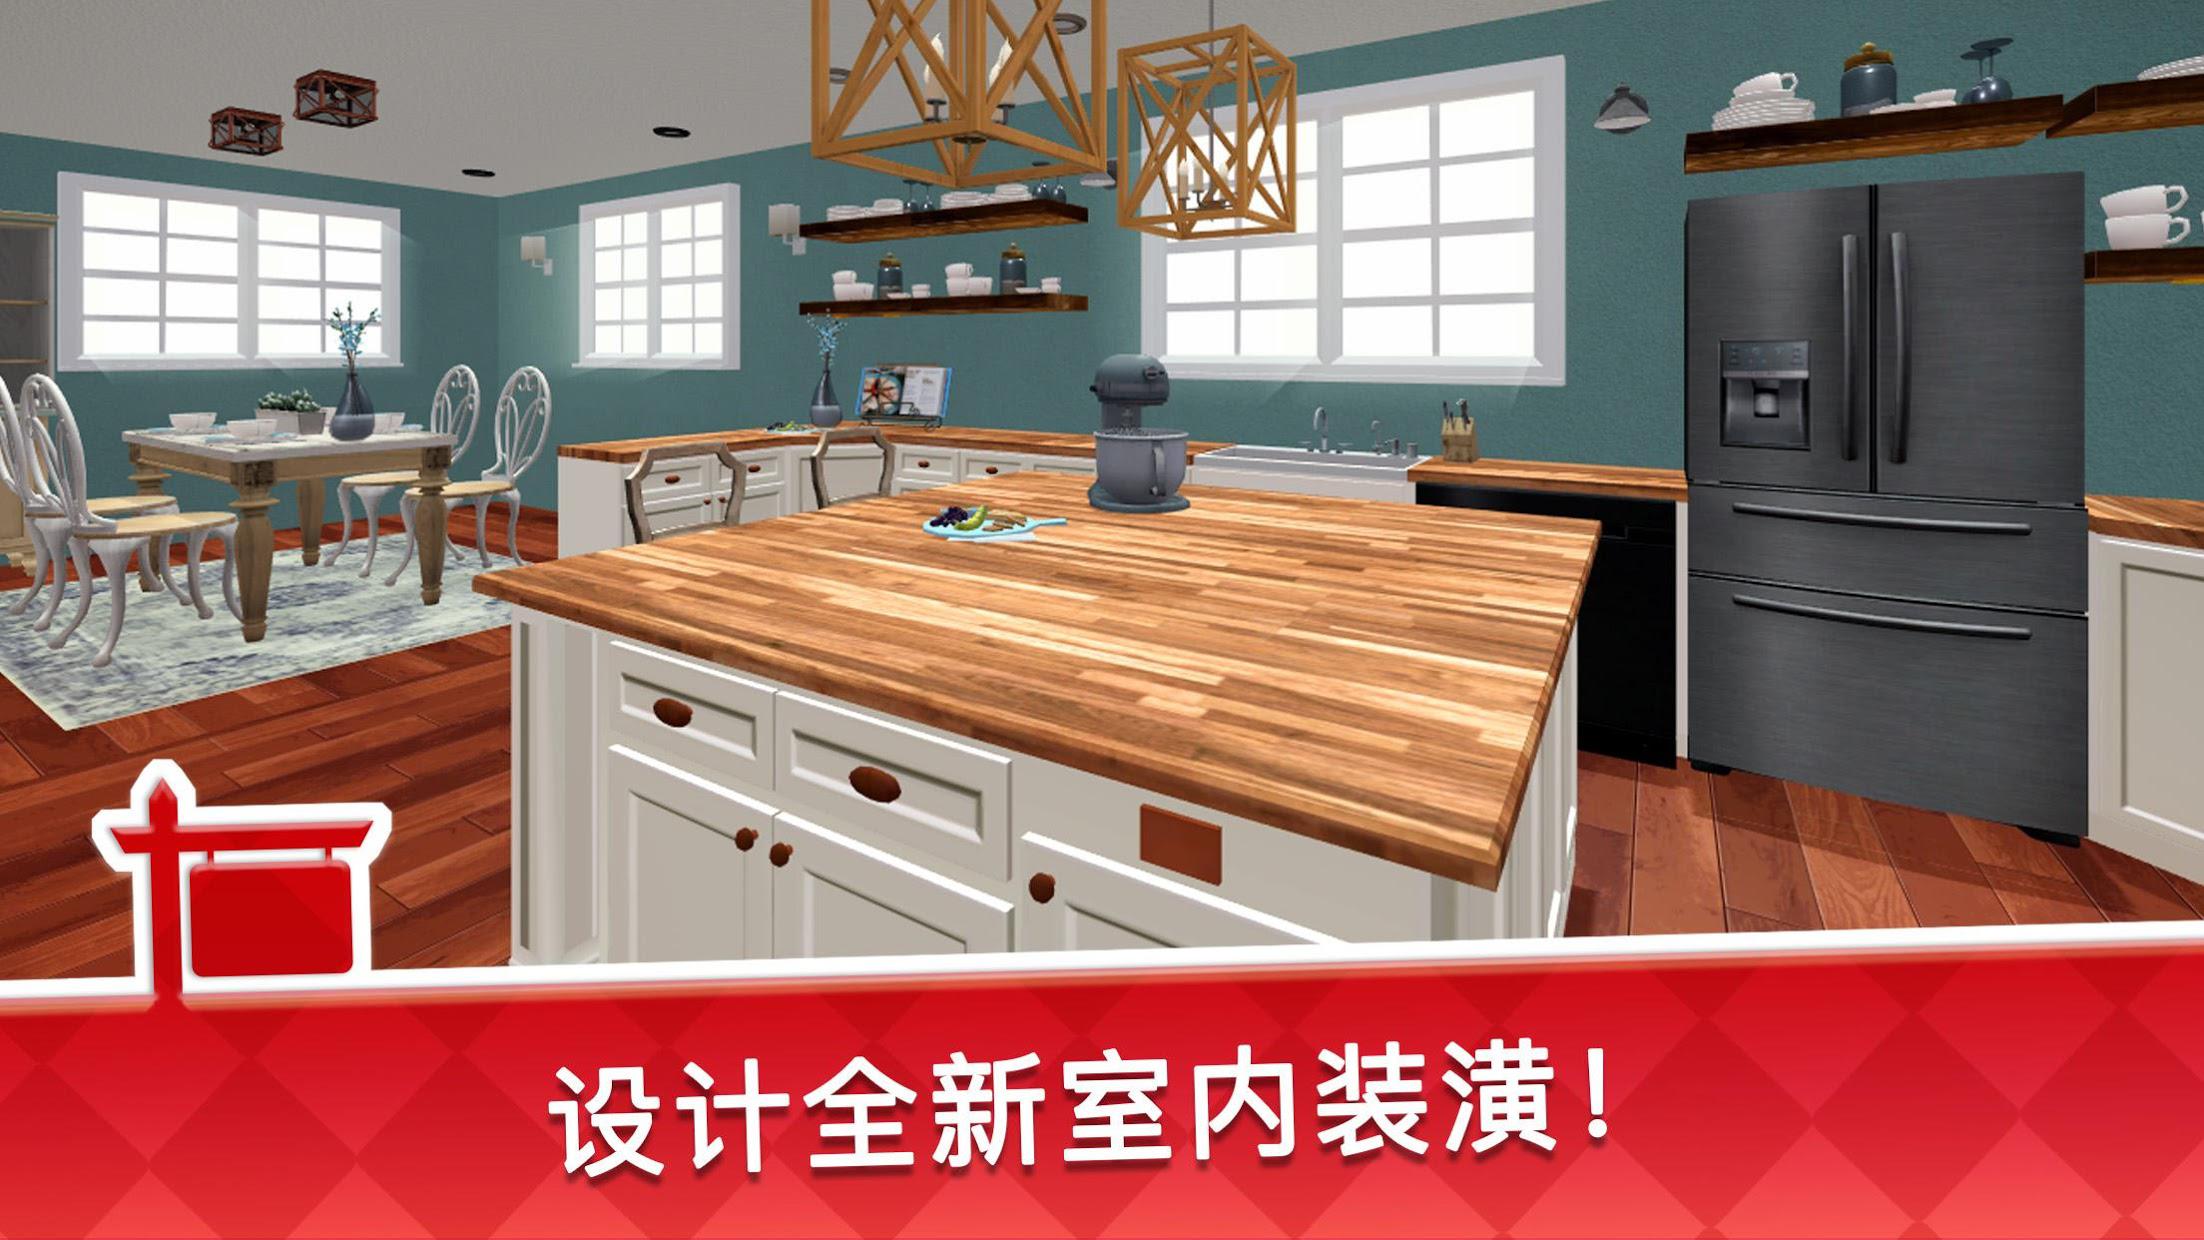 House Flip with Chip and Jo_游戏简介_图2